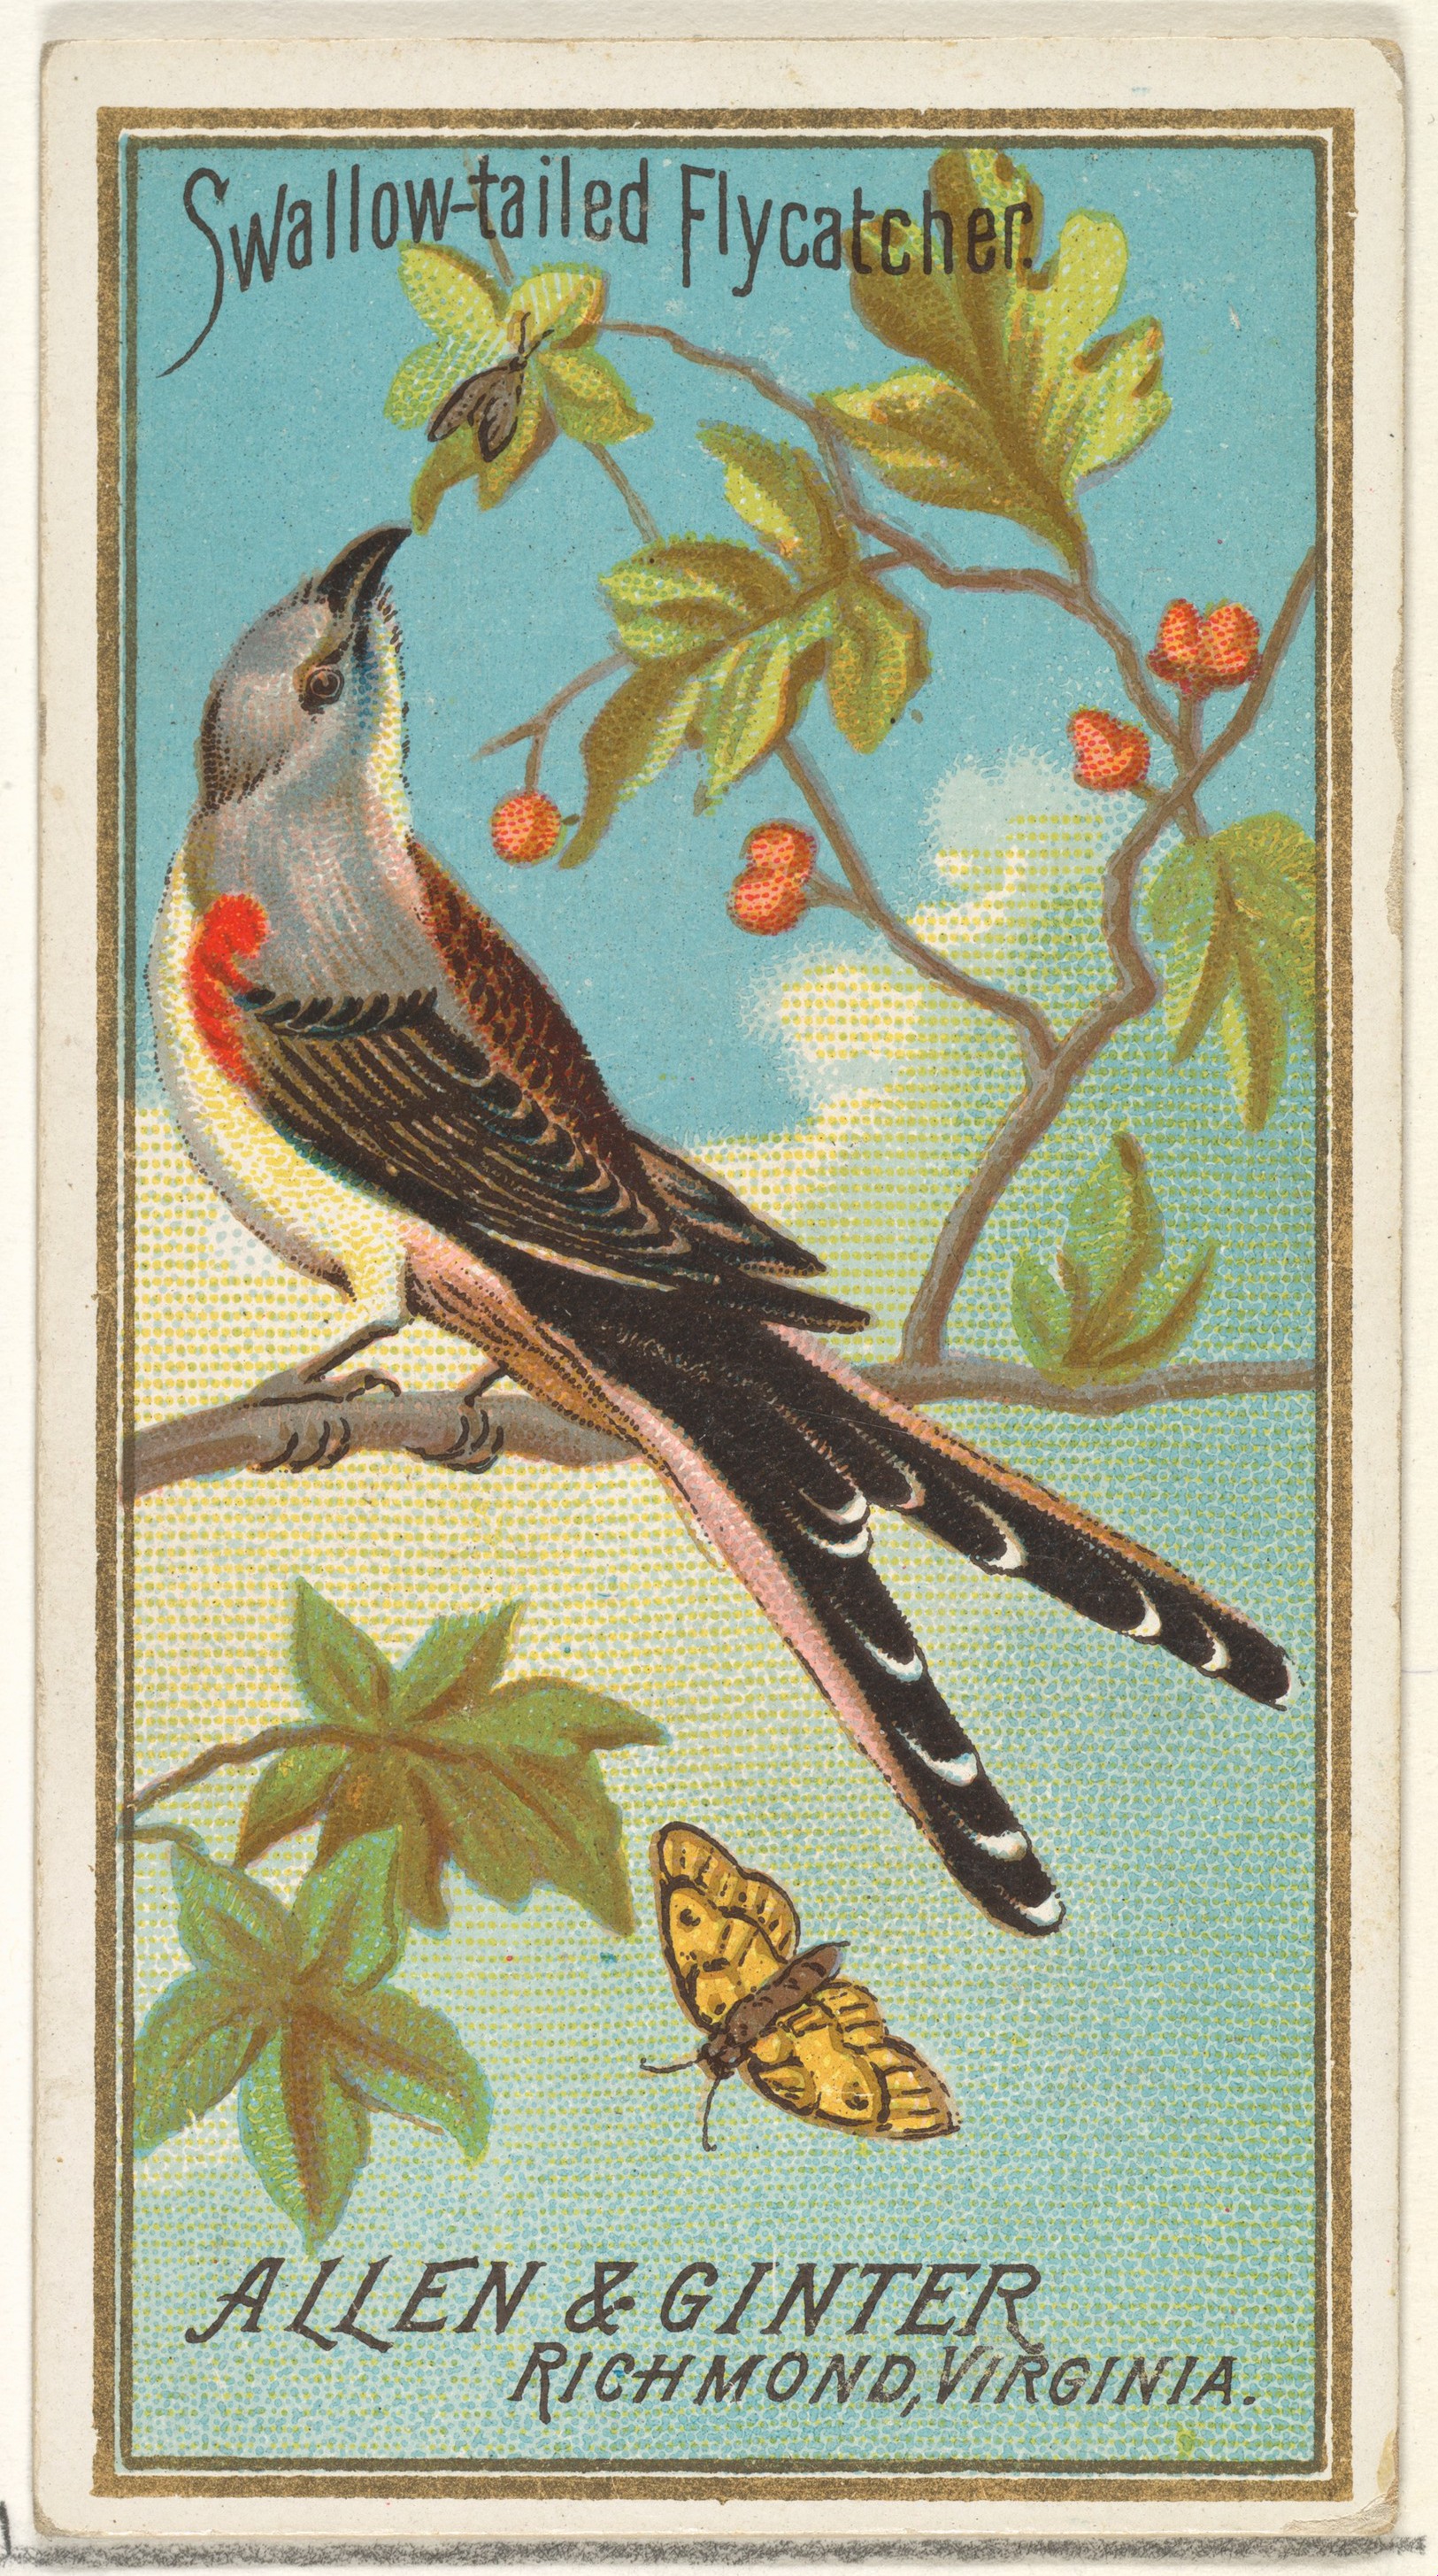 Issued by Allen & Ginter | Swallow-tailed Flycatcher, from the Birds of ...